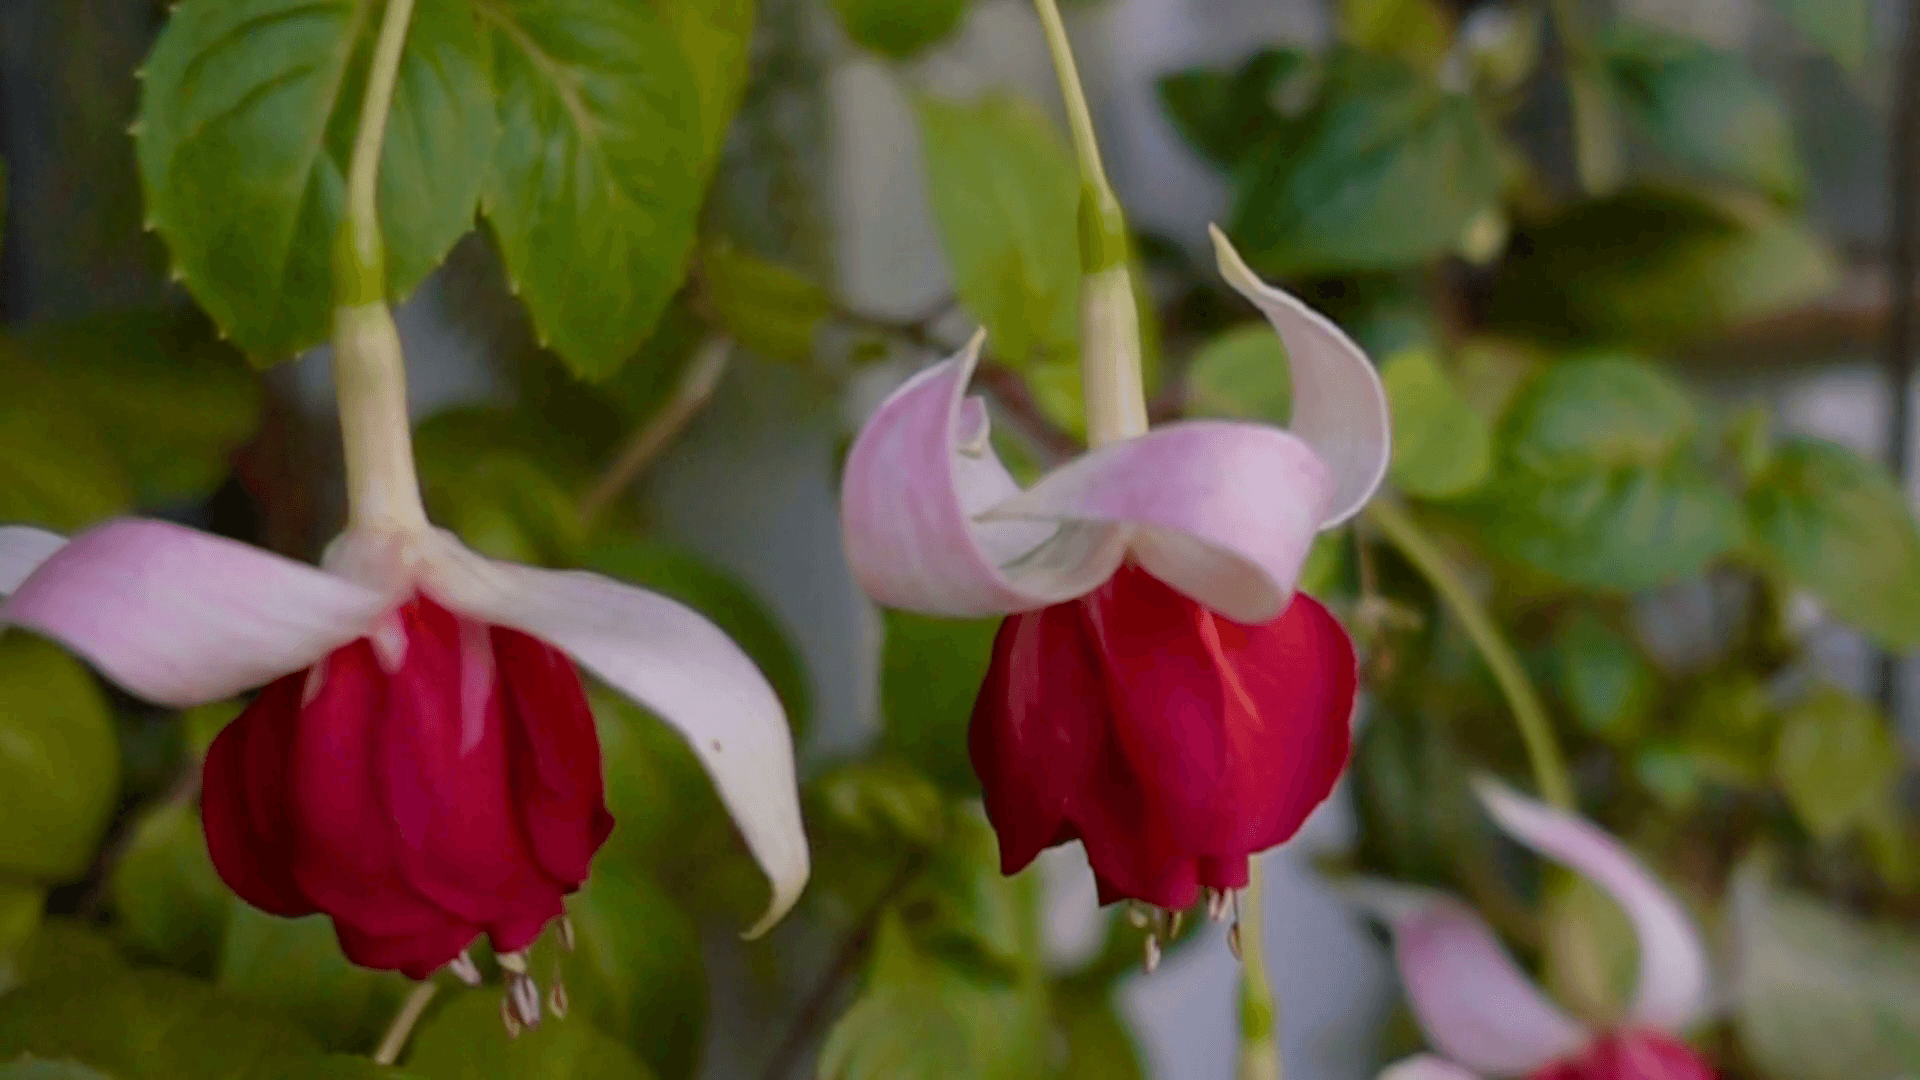 blooming red and white fuchsia flower on nature background, Veenlast